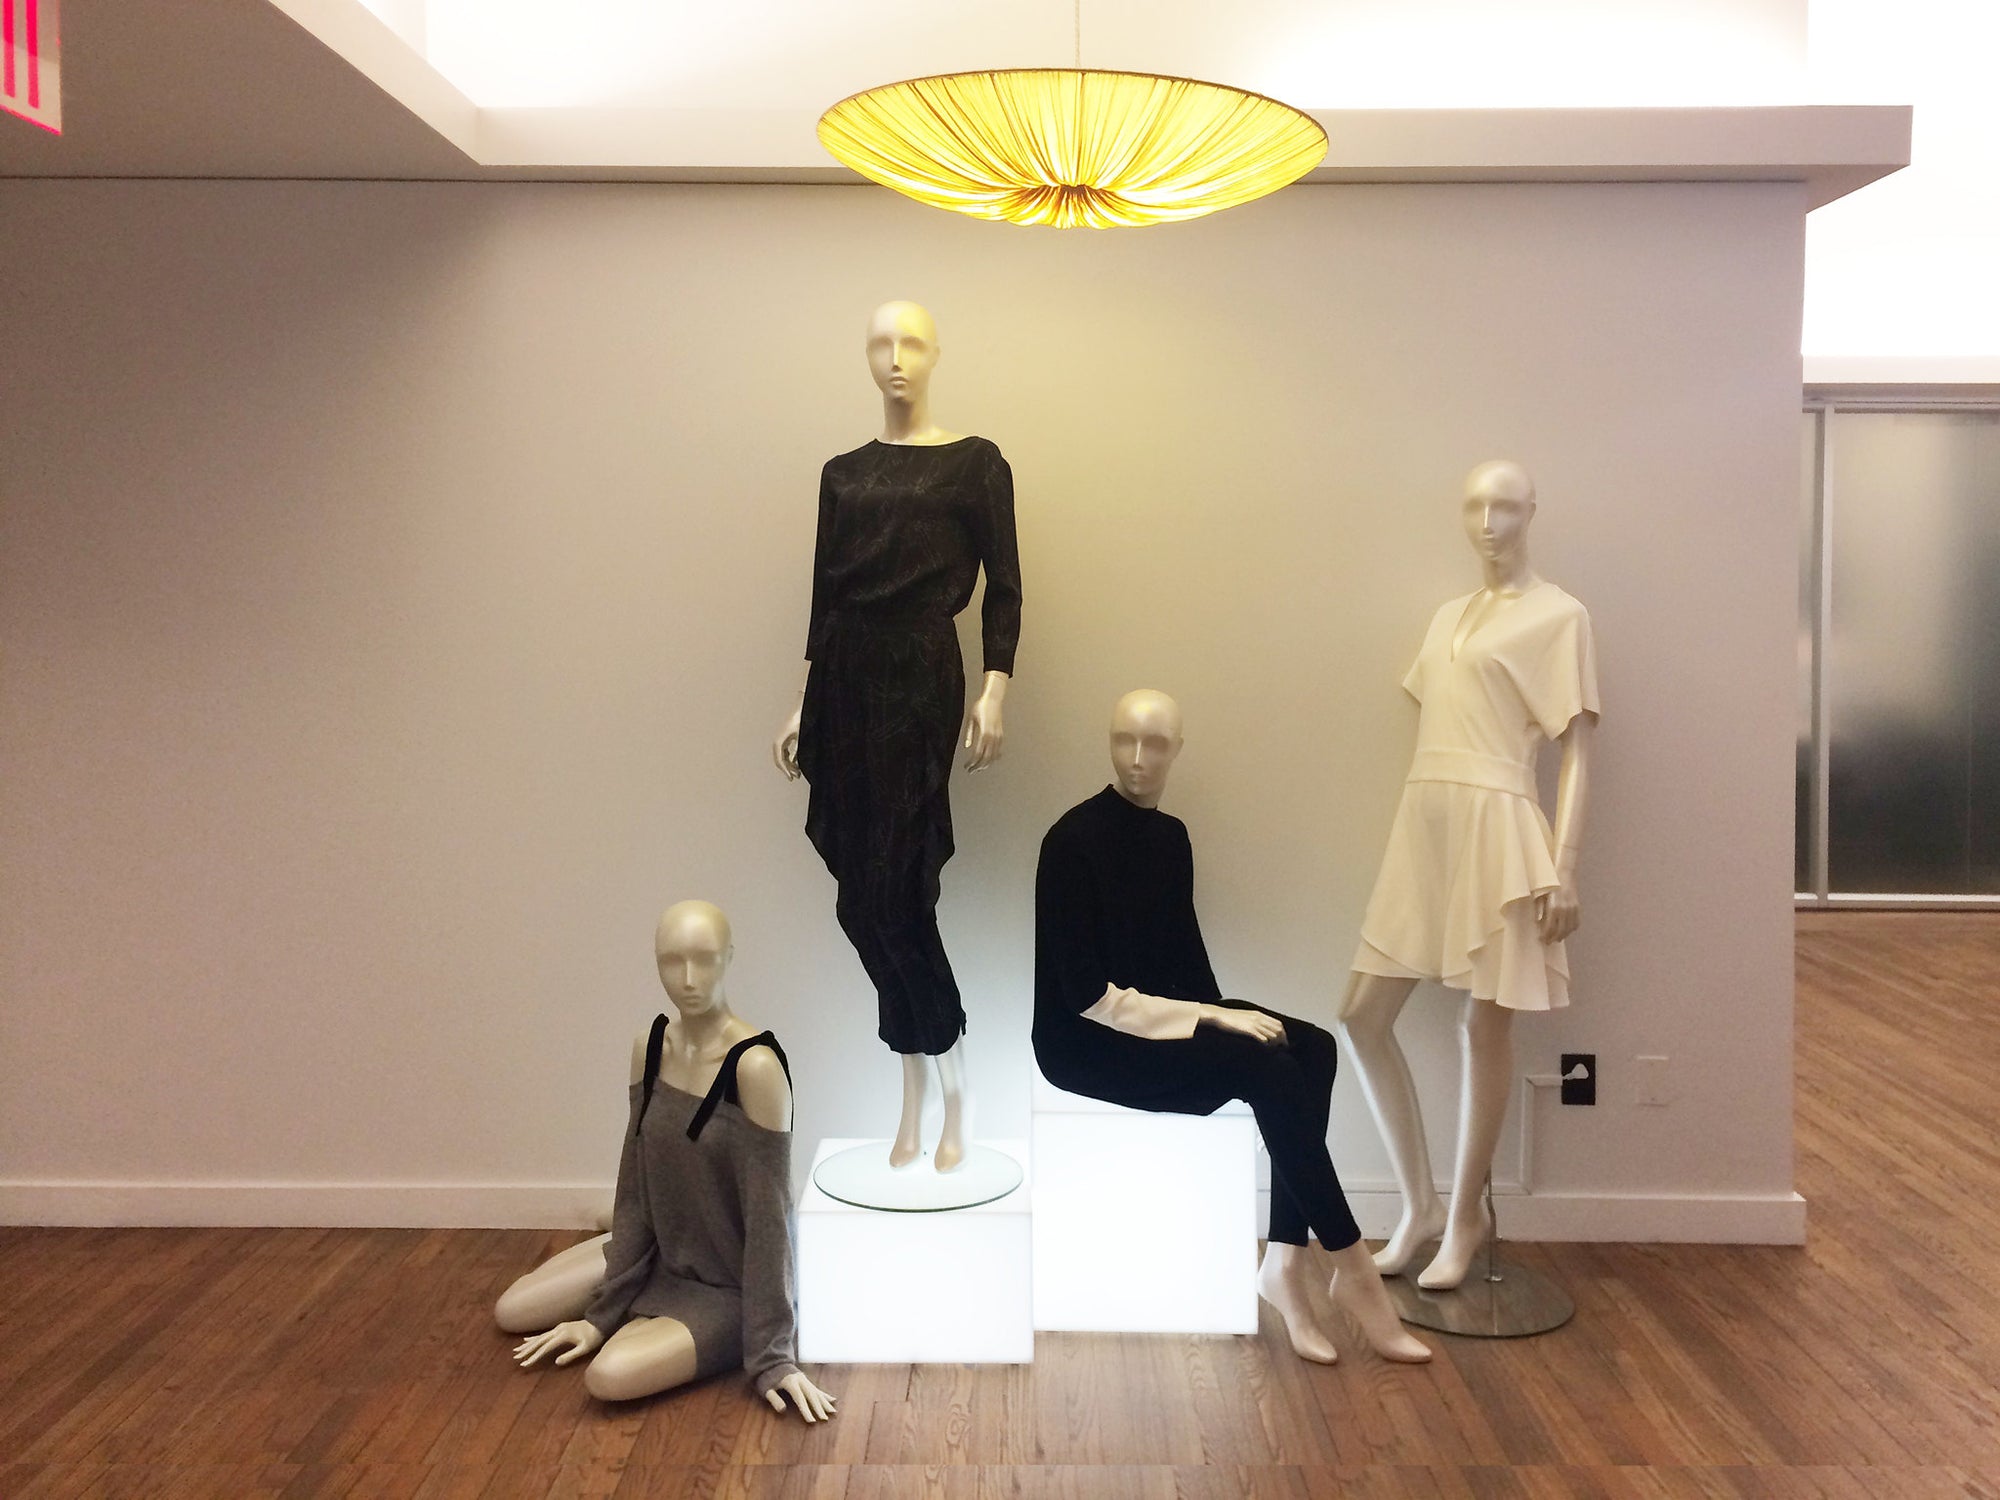 Four mannequins seated on and around two sign white illuminated cube pedestals.